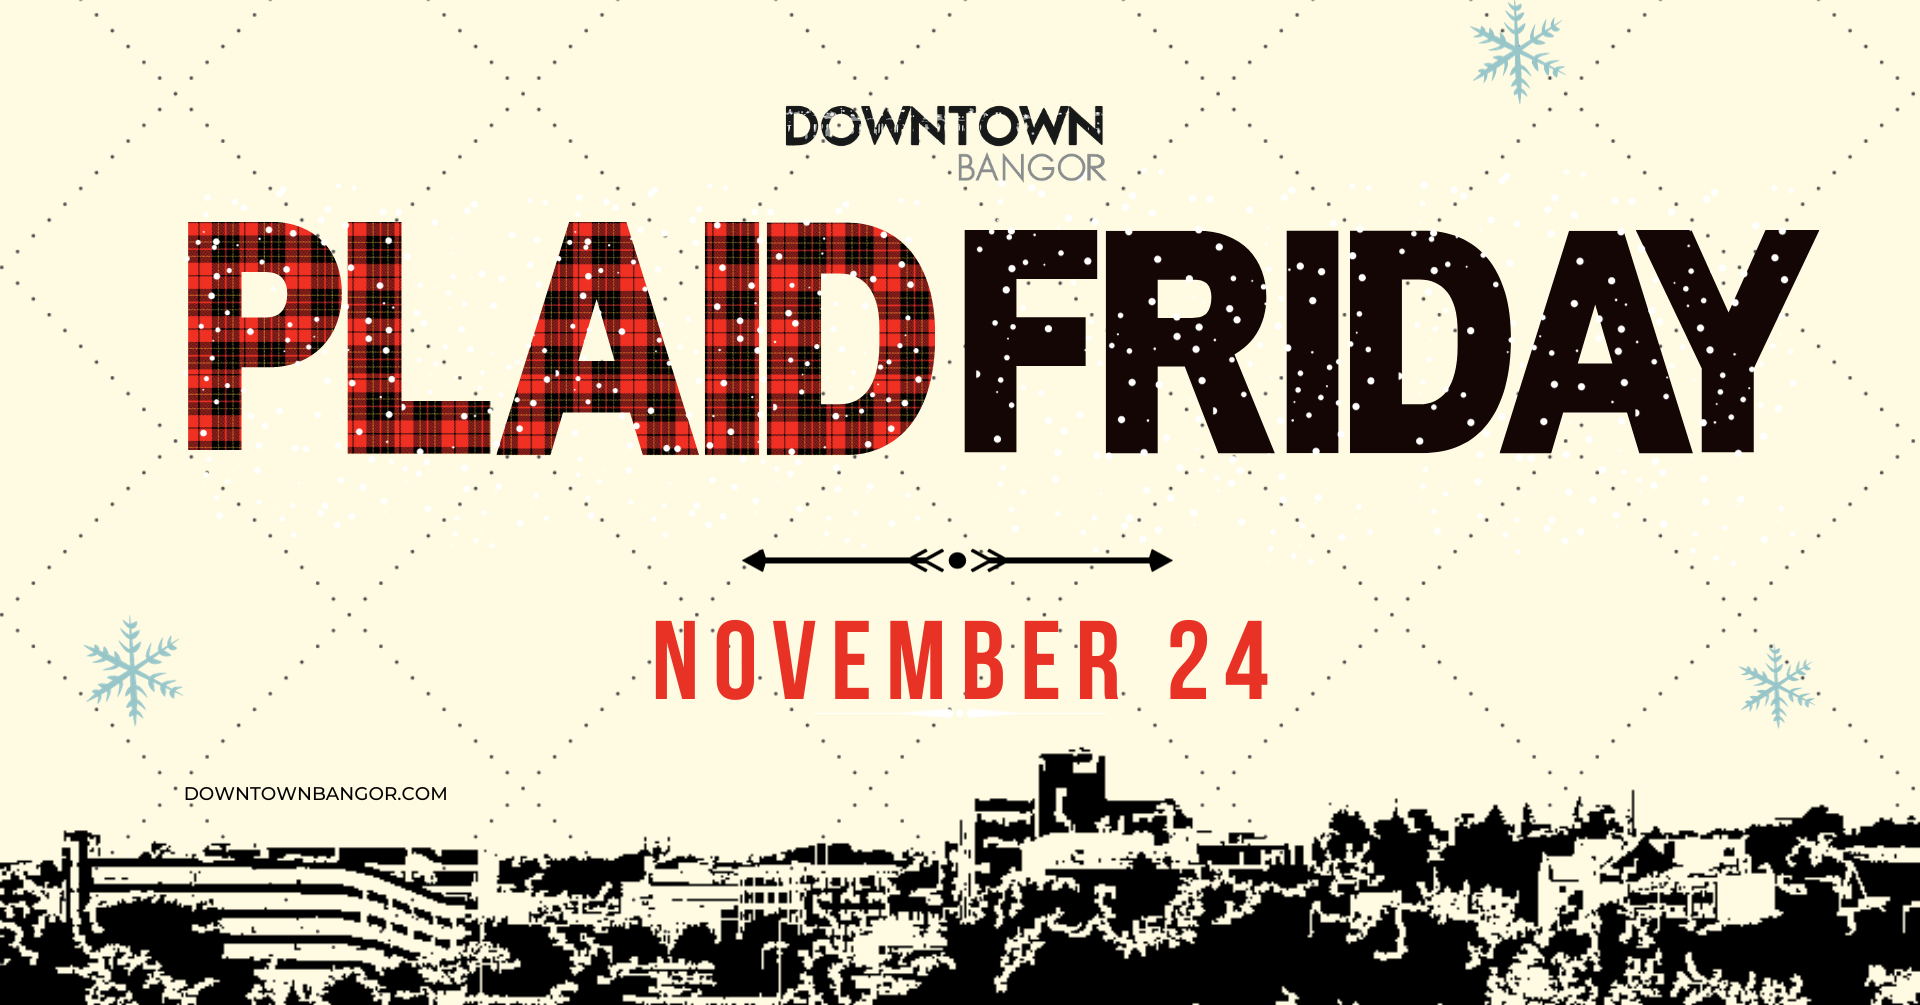 DBP PLAID FRIDAY 2023 Facebook Event Cover 1920 × 1005